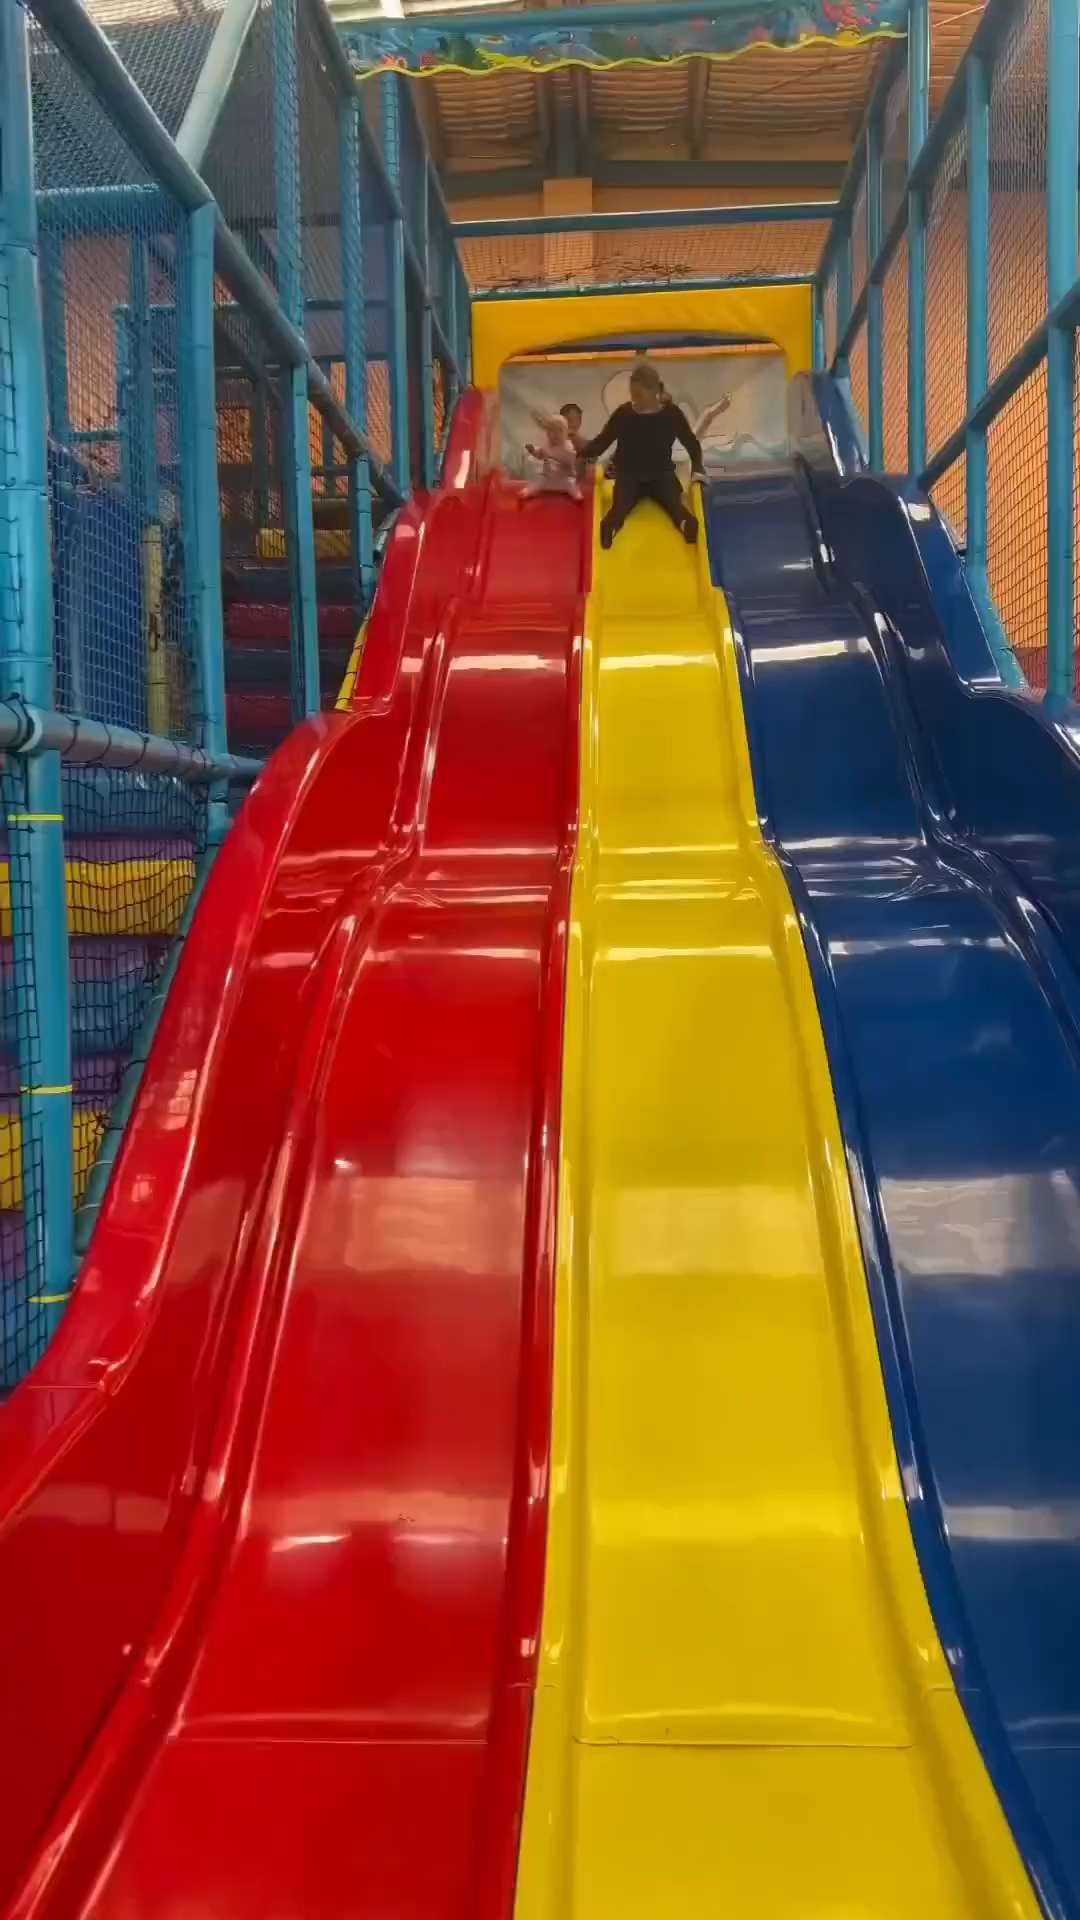 Little girl riding the slide with her toy doll